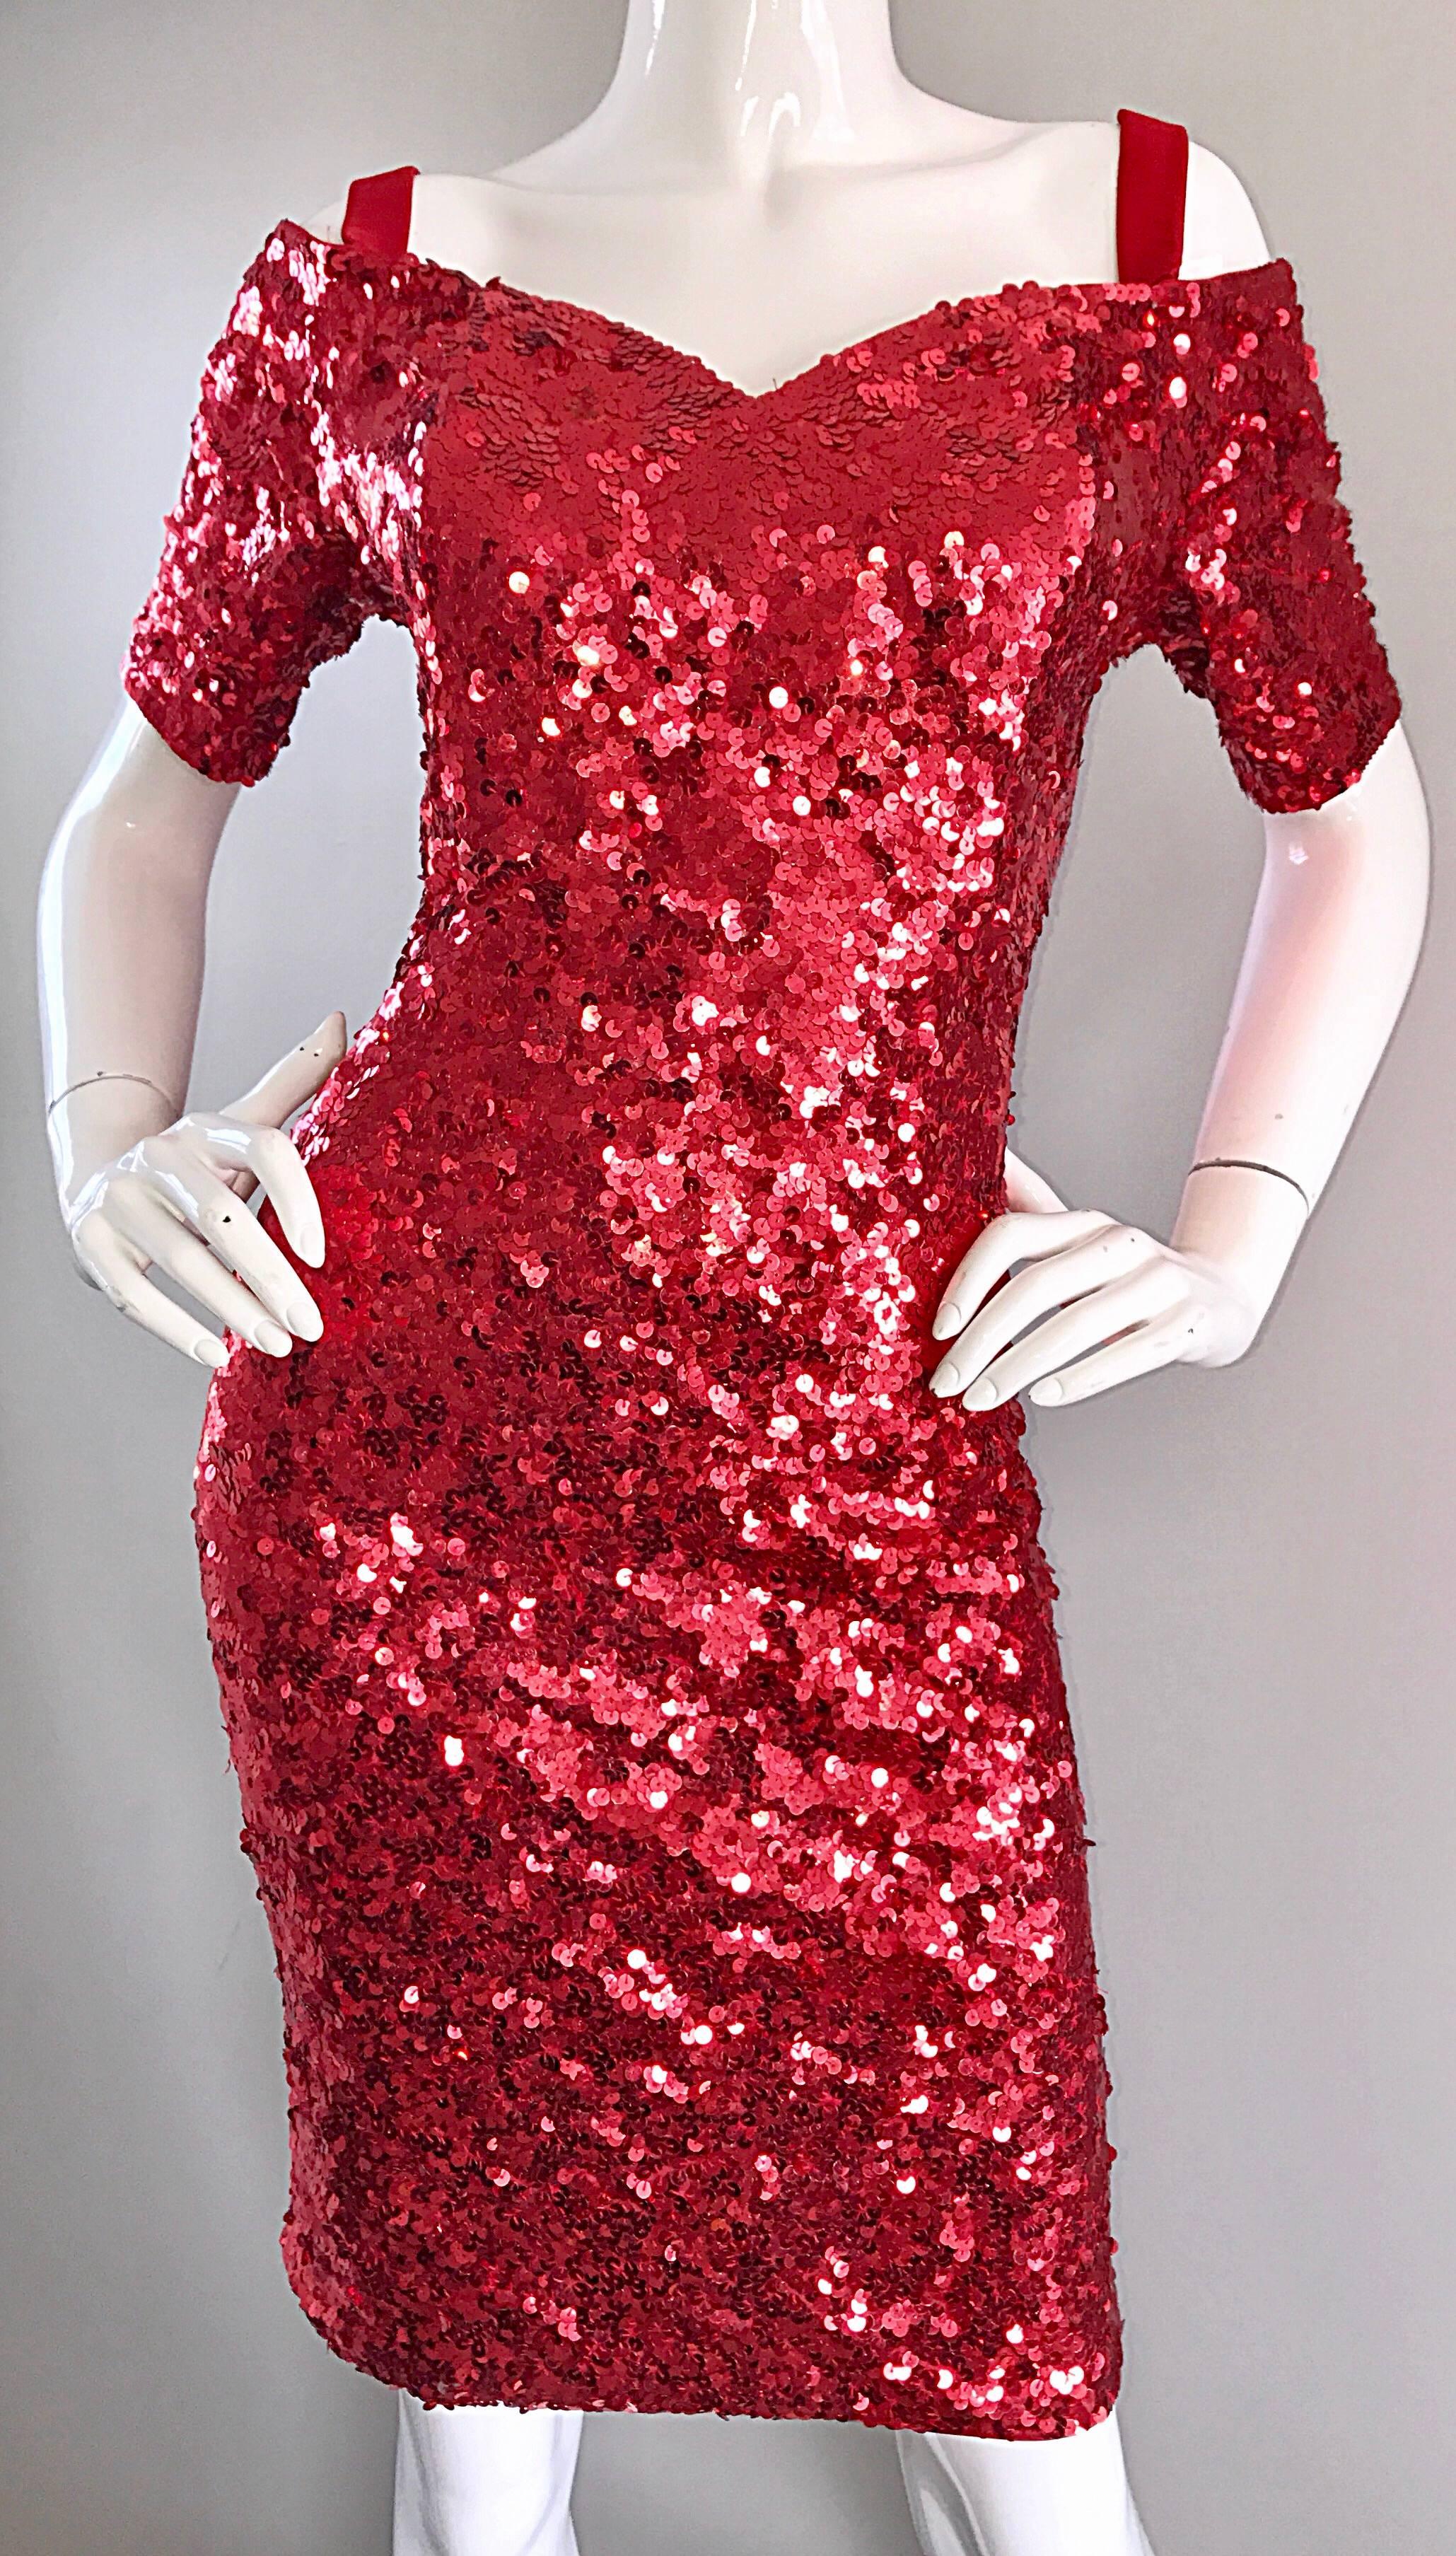 Lillie Rubin 1990s Sexy Vintage Red Sequin Off The Shoulder 90s Bodycon Dress In Excellent Condition For Sale In San Diego, CA